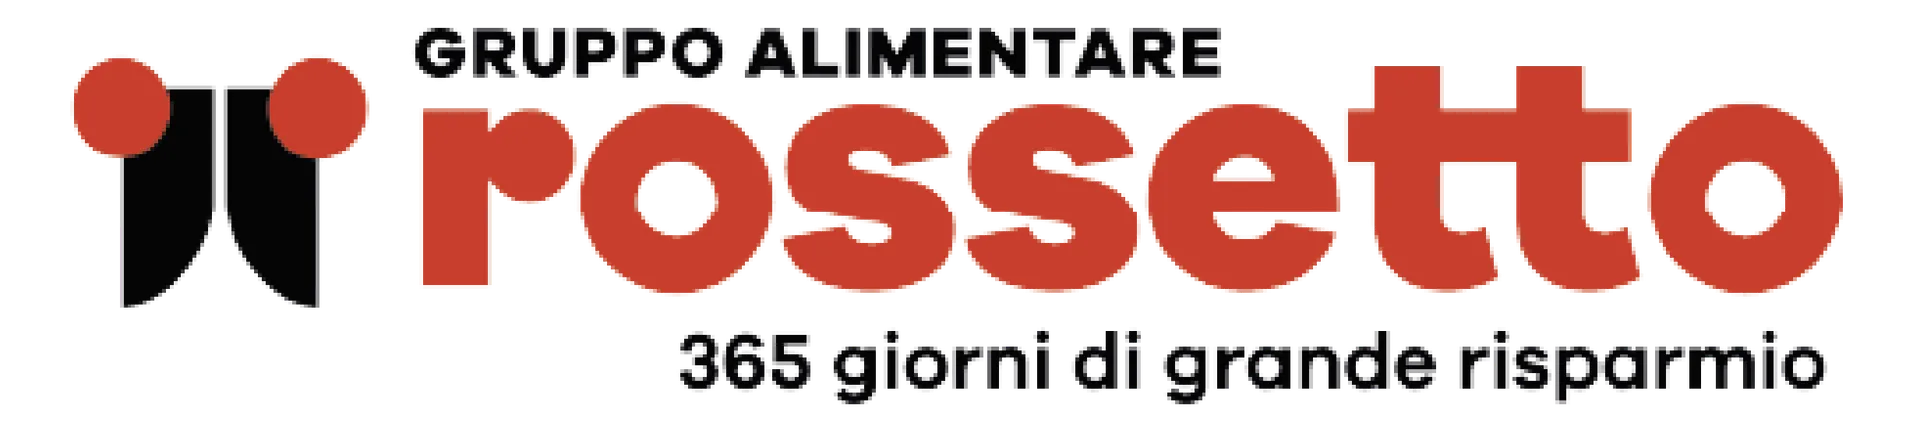 ROSSETTO GROUP logo